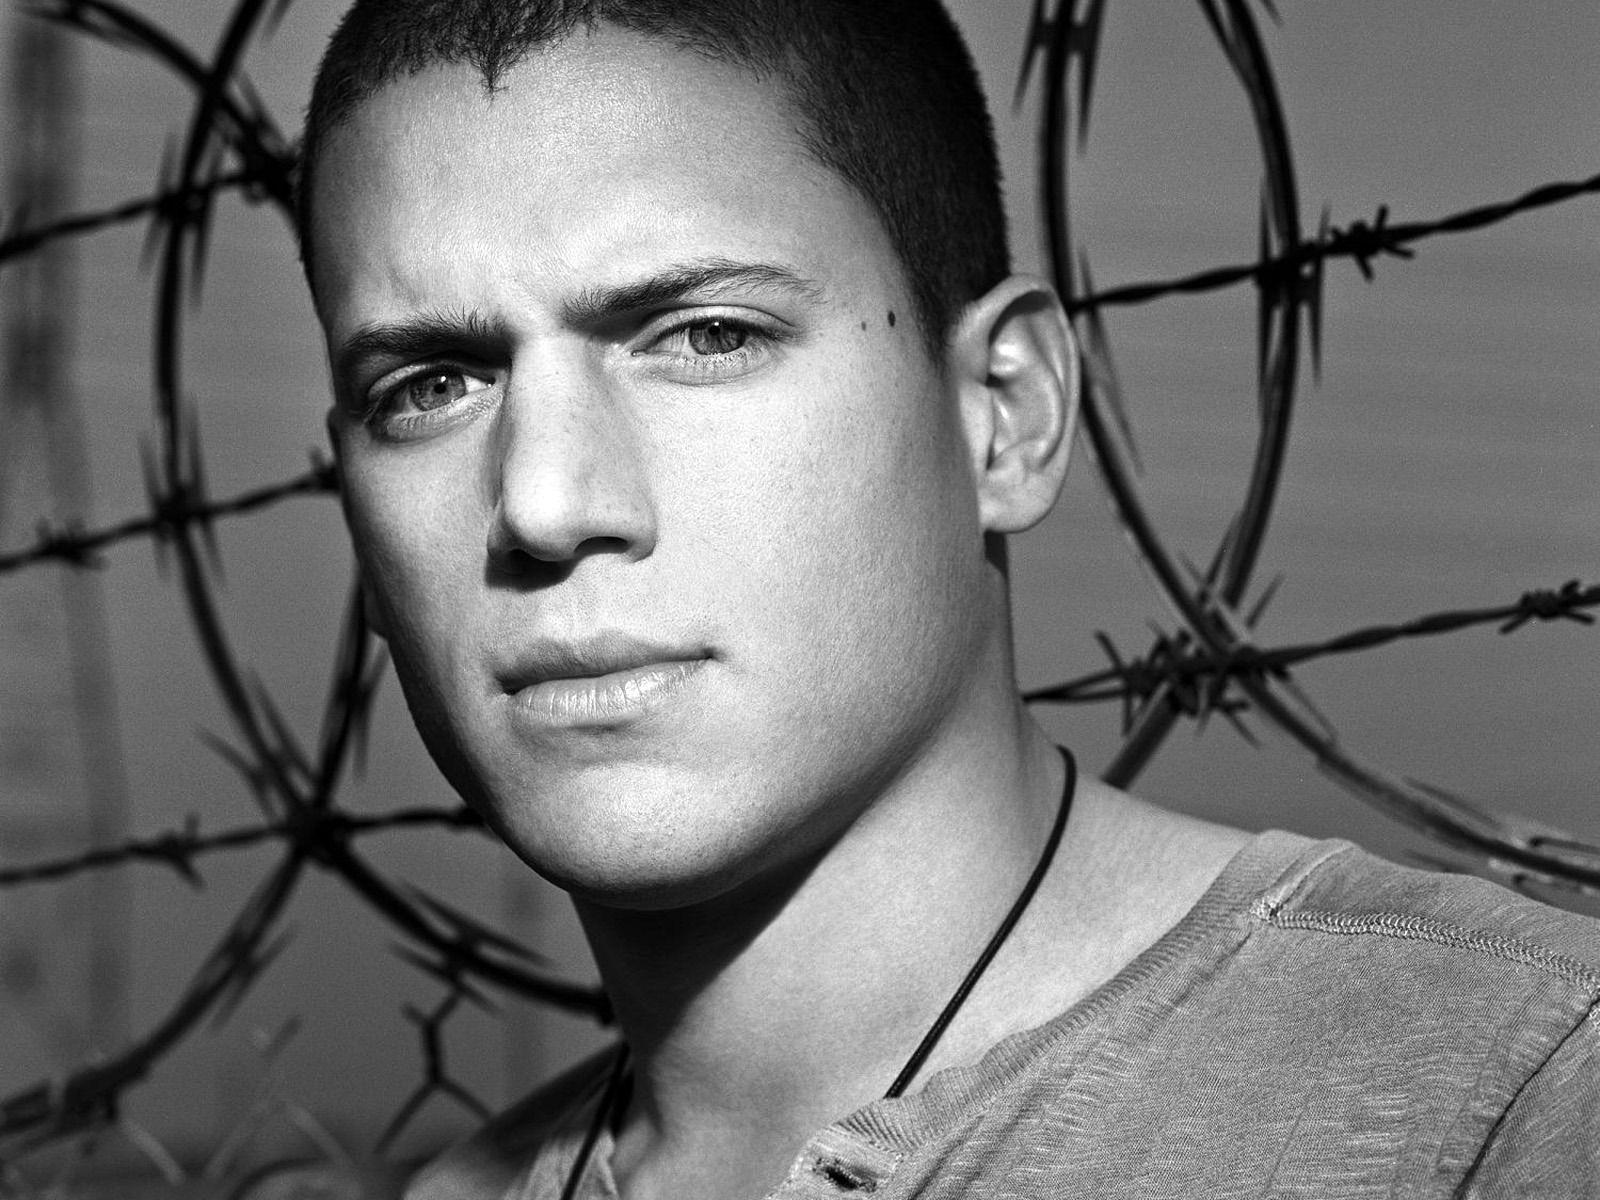 famous prison break quotes. Wentworth Miller Refuses to Go to